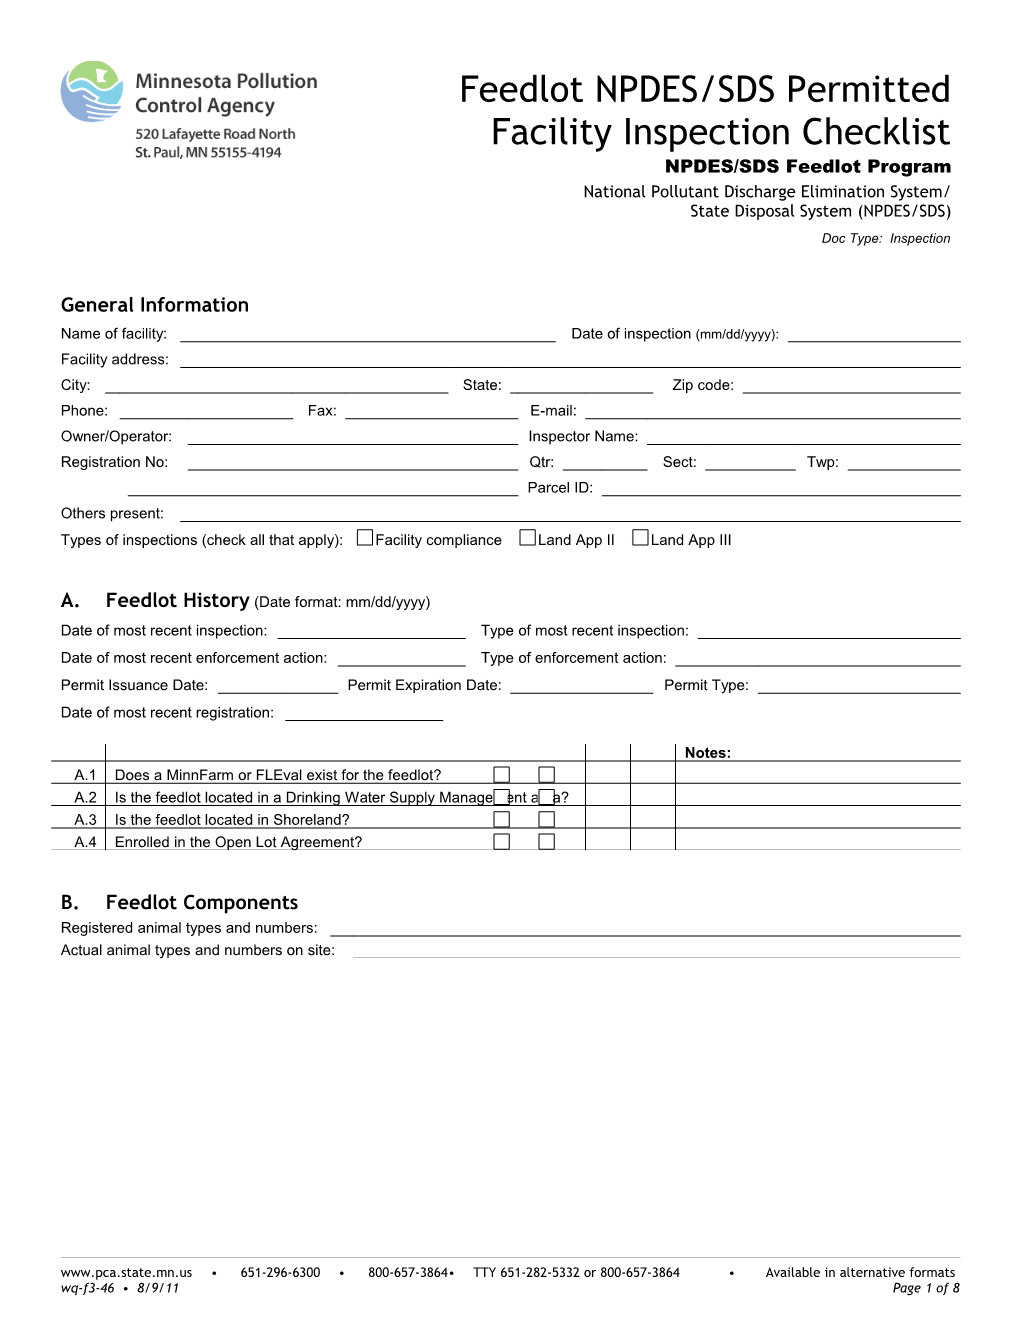 Feedlot NPDES/SDS Permitted Facility Inspection Checklist - Form